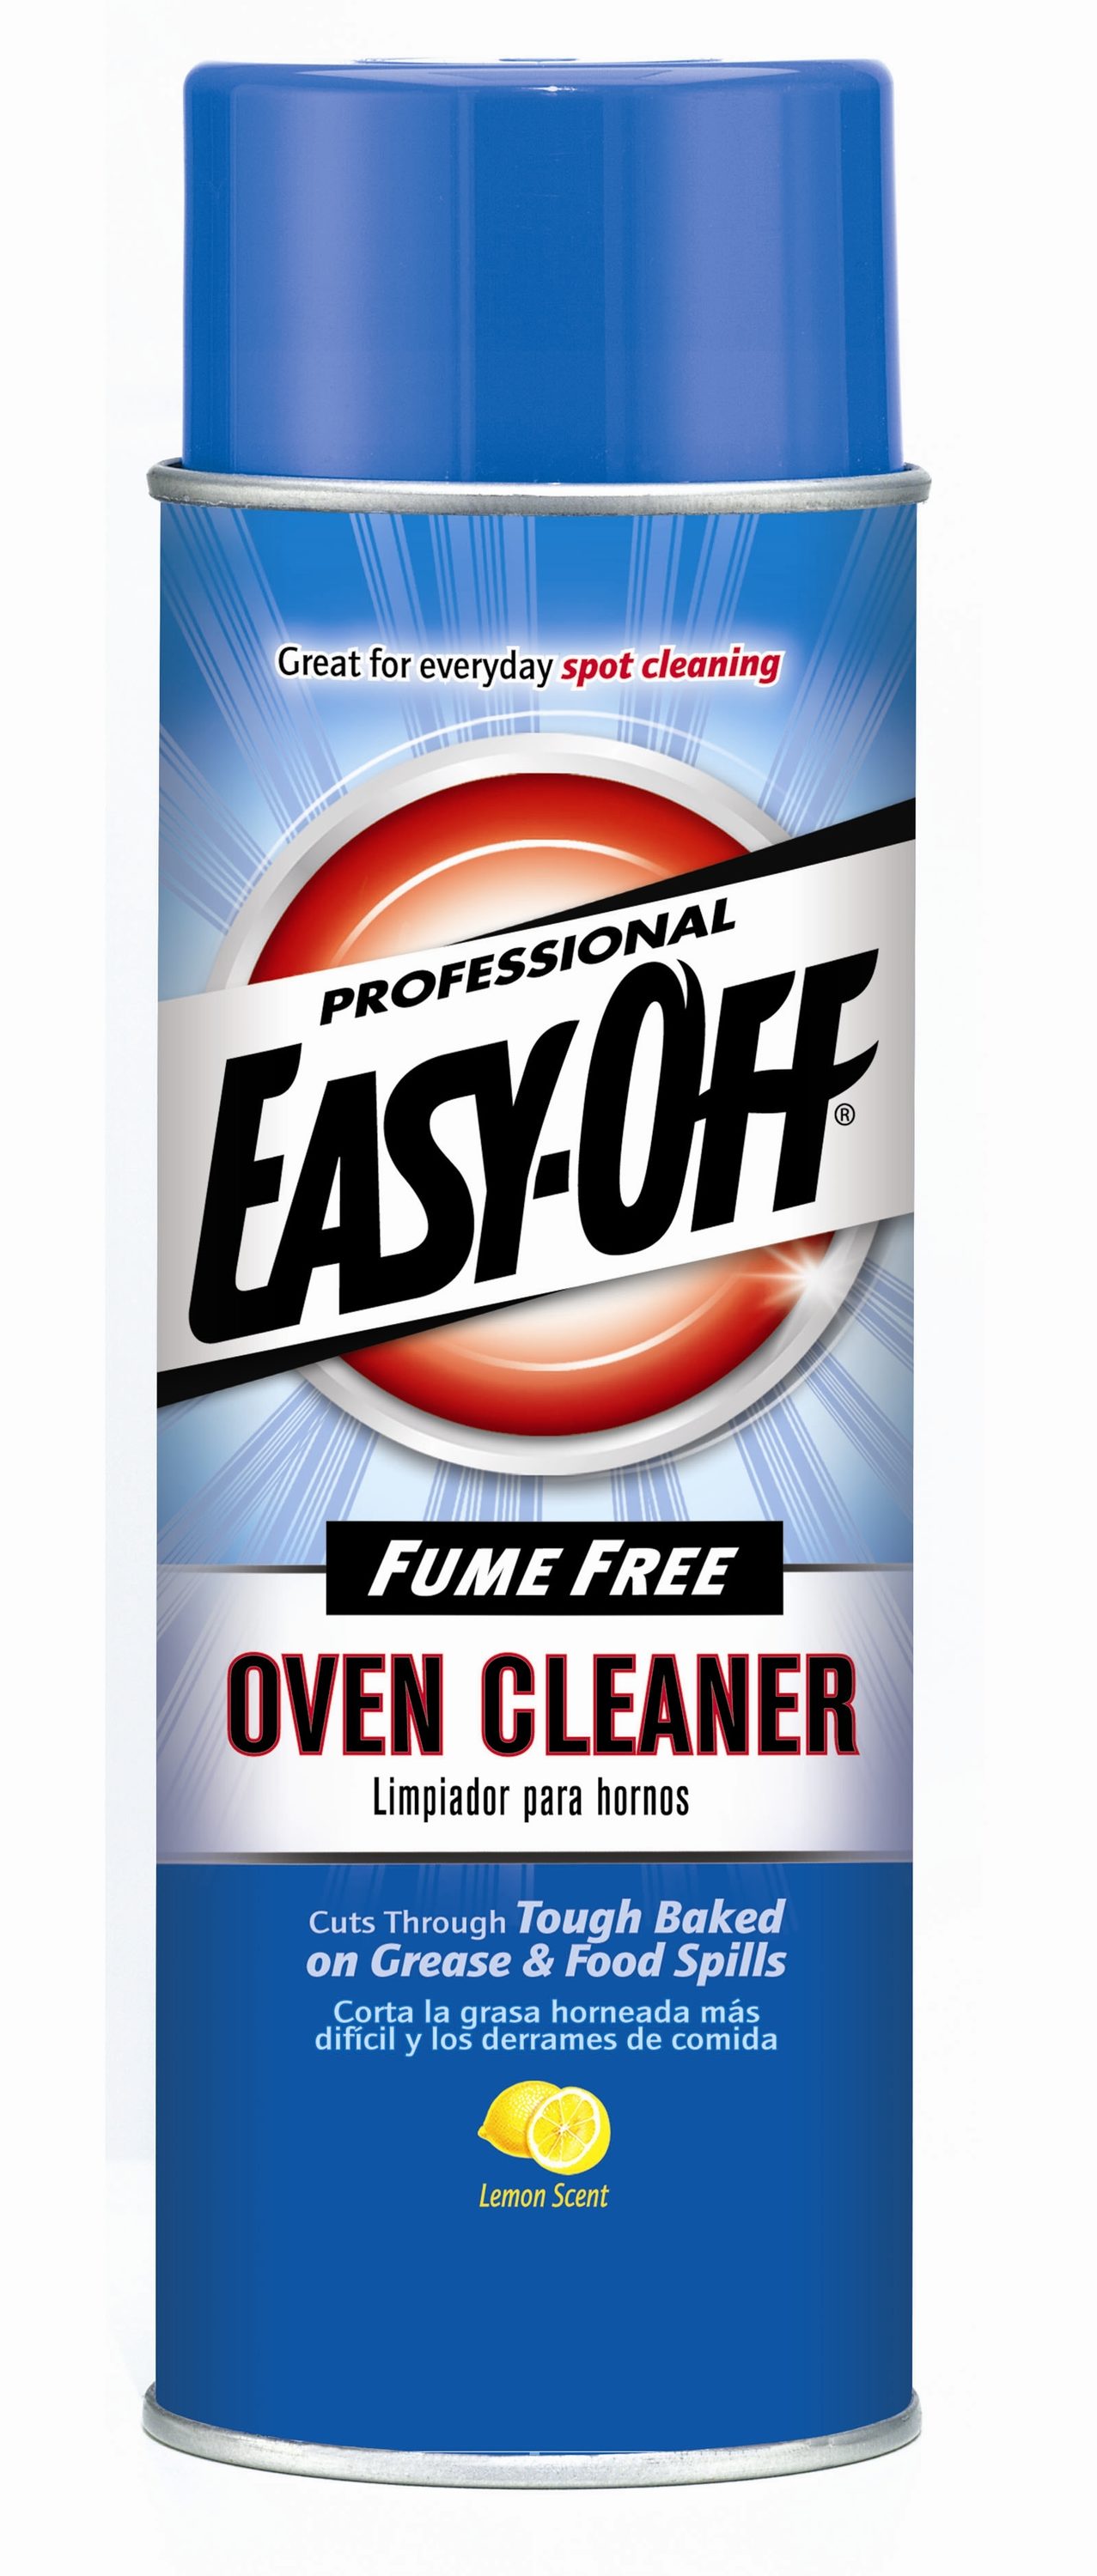 OVEN CLEANING WITH EASY OFF FUME FREE OVEN CLEANER